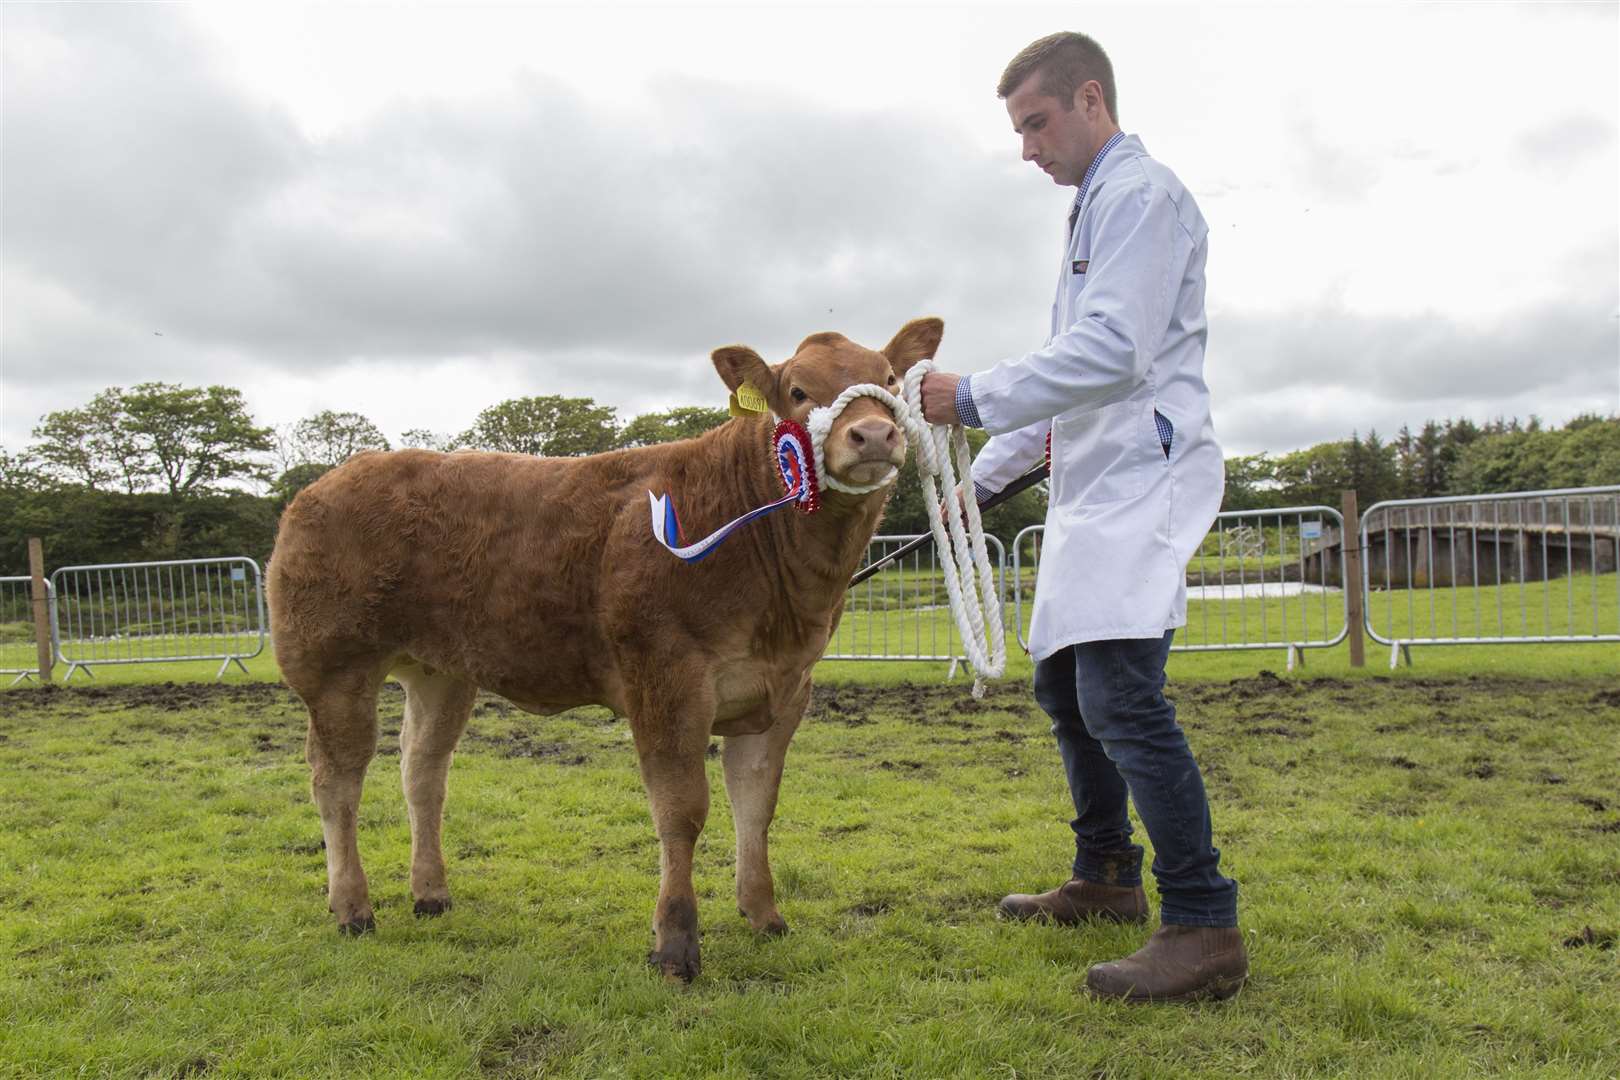 Kris Sutherland, Dunbeath Farms, took the supreme cattle championship and champion of champions title at the last County Show in 2019 with his commercial champion, Sassy Lady, a March-born Limousin cross heifer after the AI bull Lodge Hamlet. Picture: Ann-Marie Jones / Northern Studios